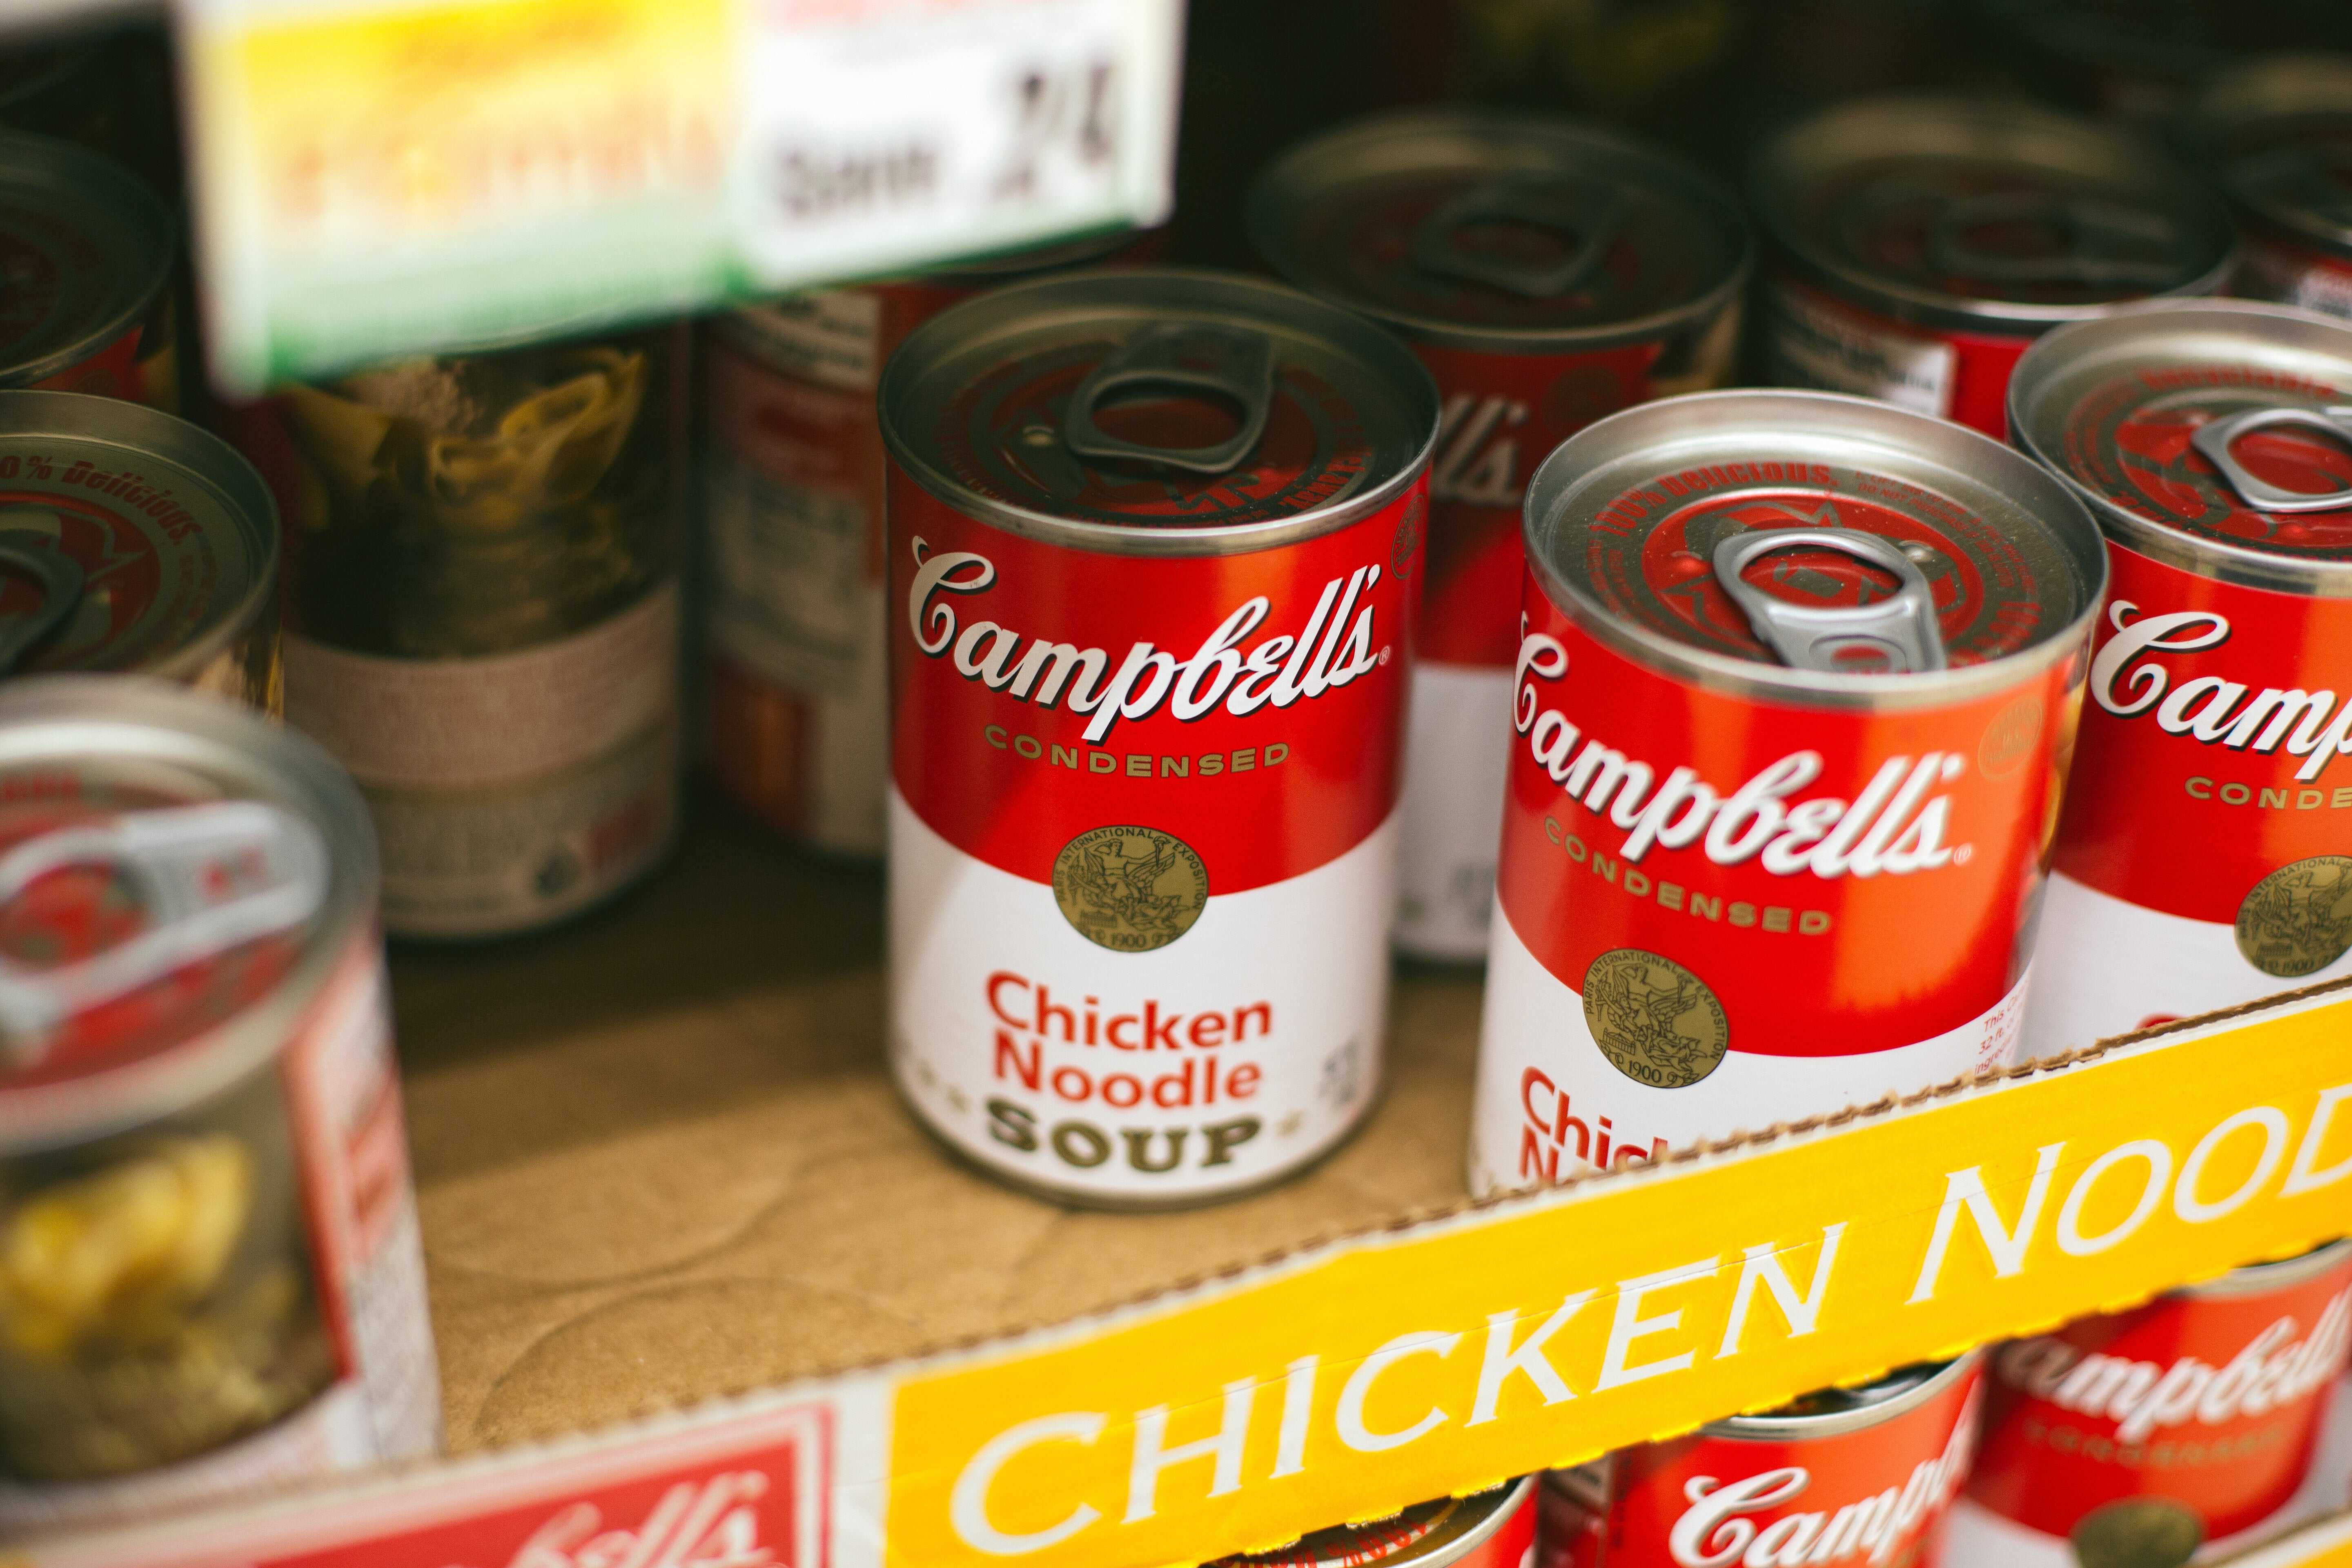 Campbell soup cans and other canned goods image.